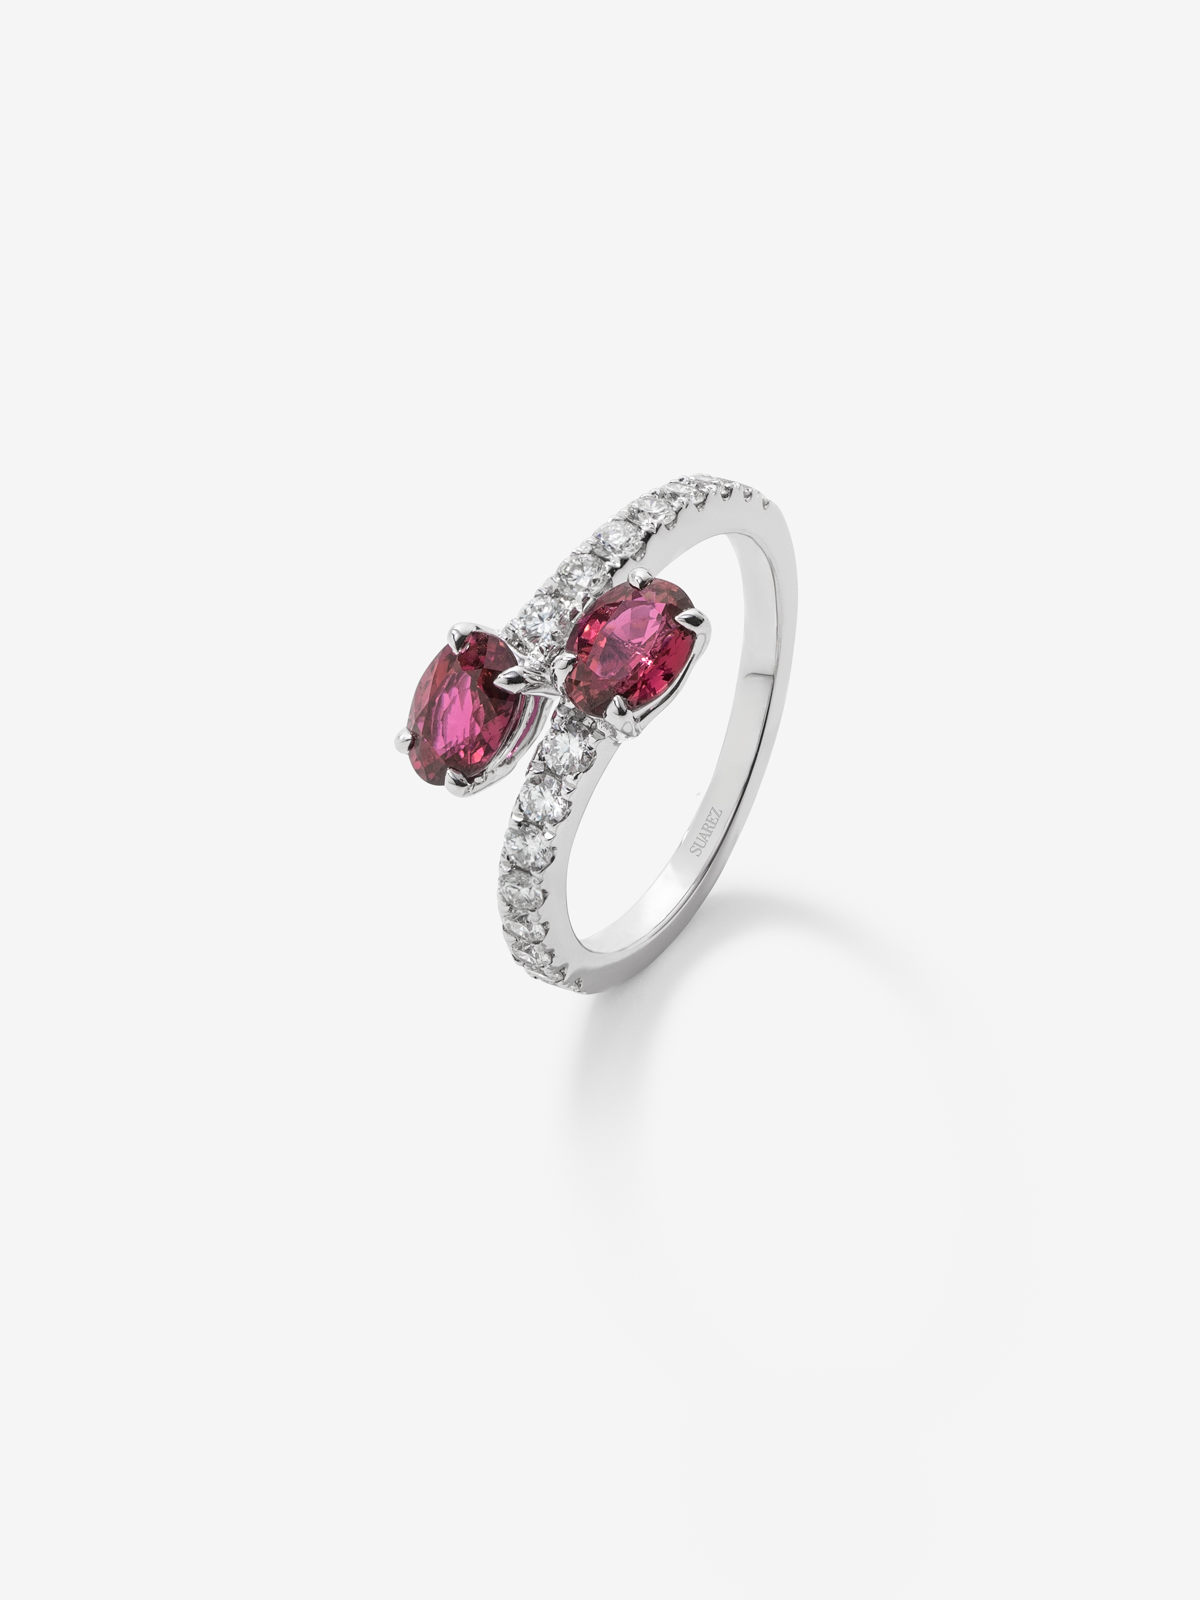 You and me 18K white gold ring with ruby and diamond.